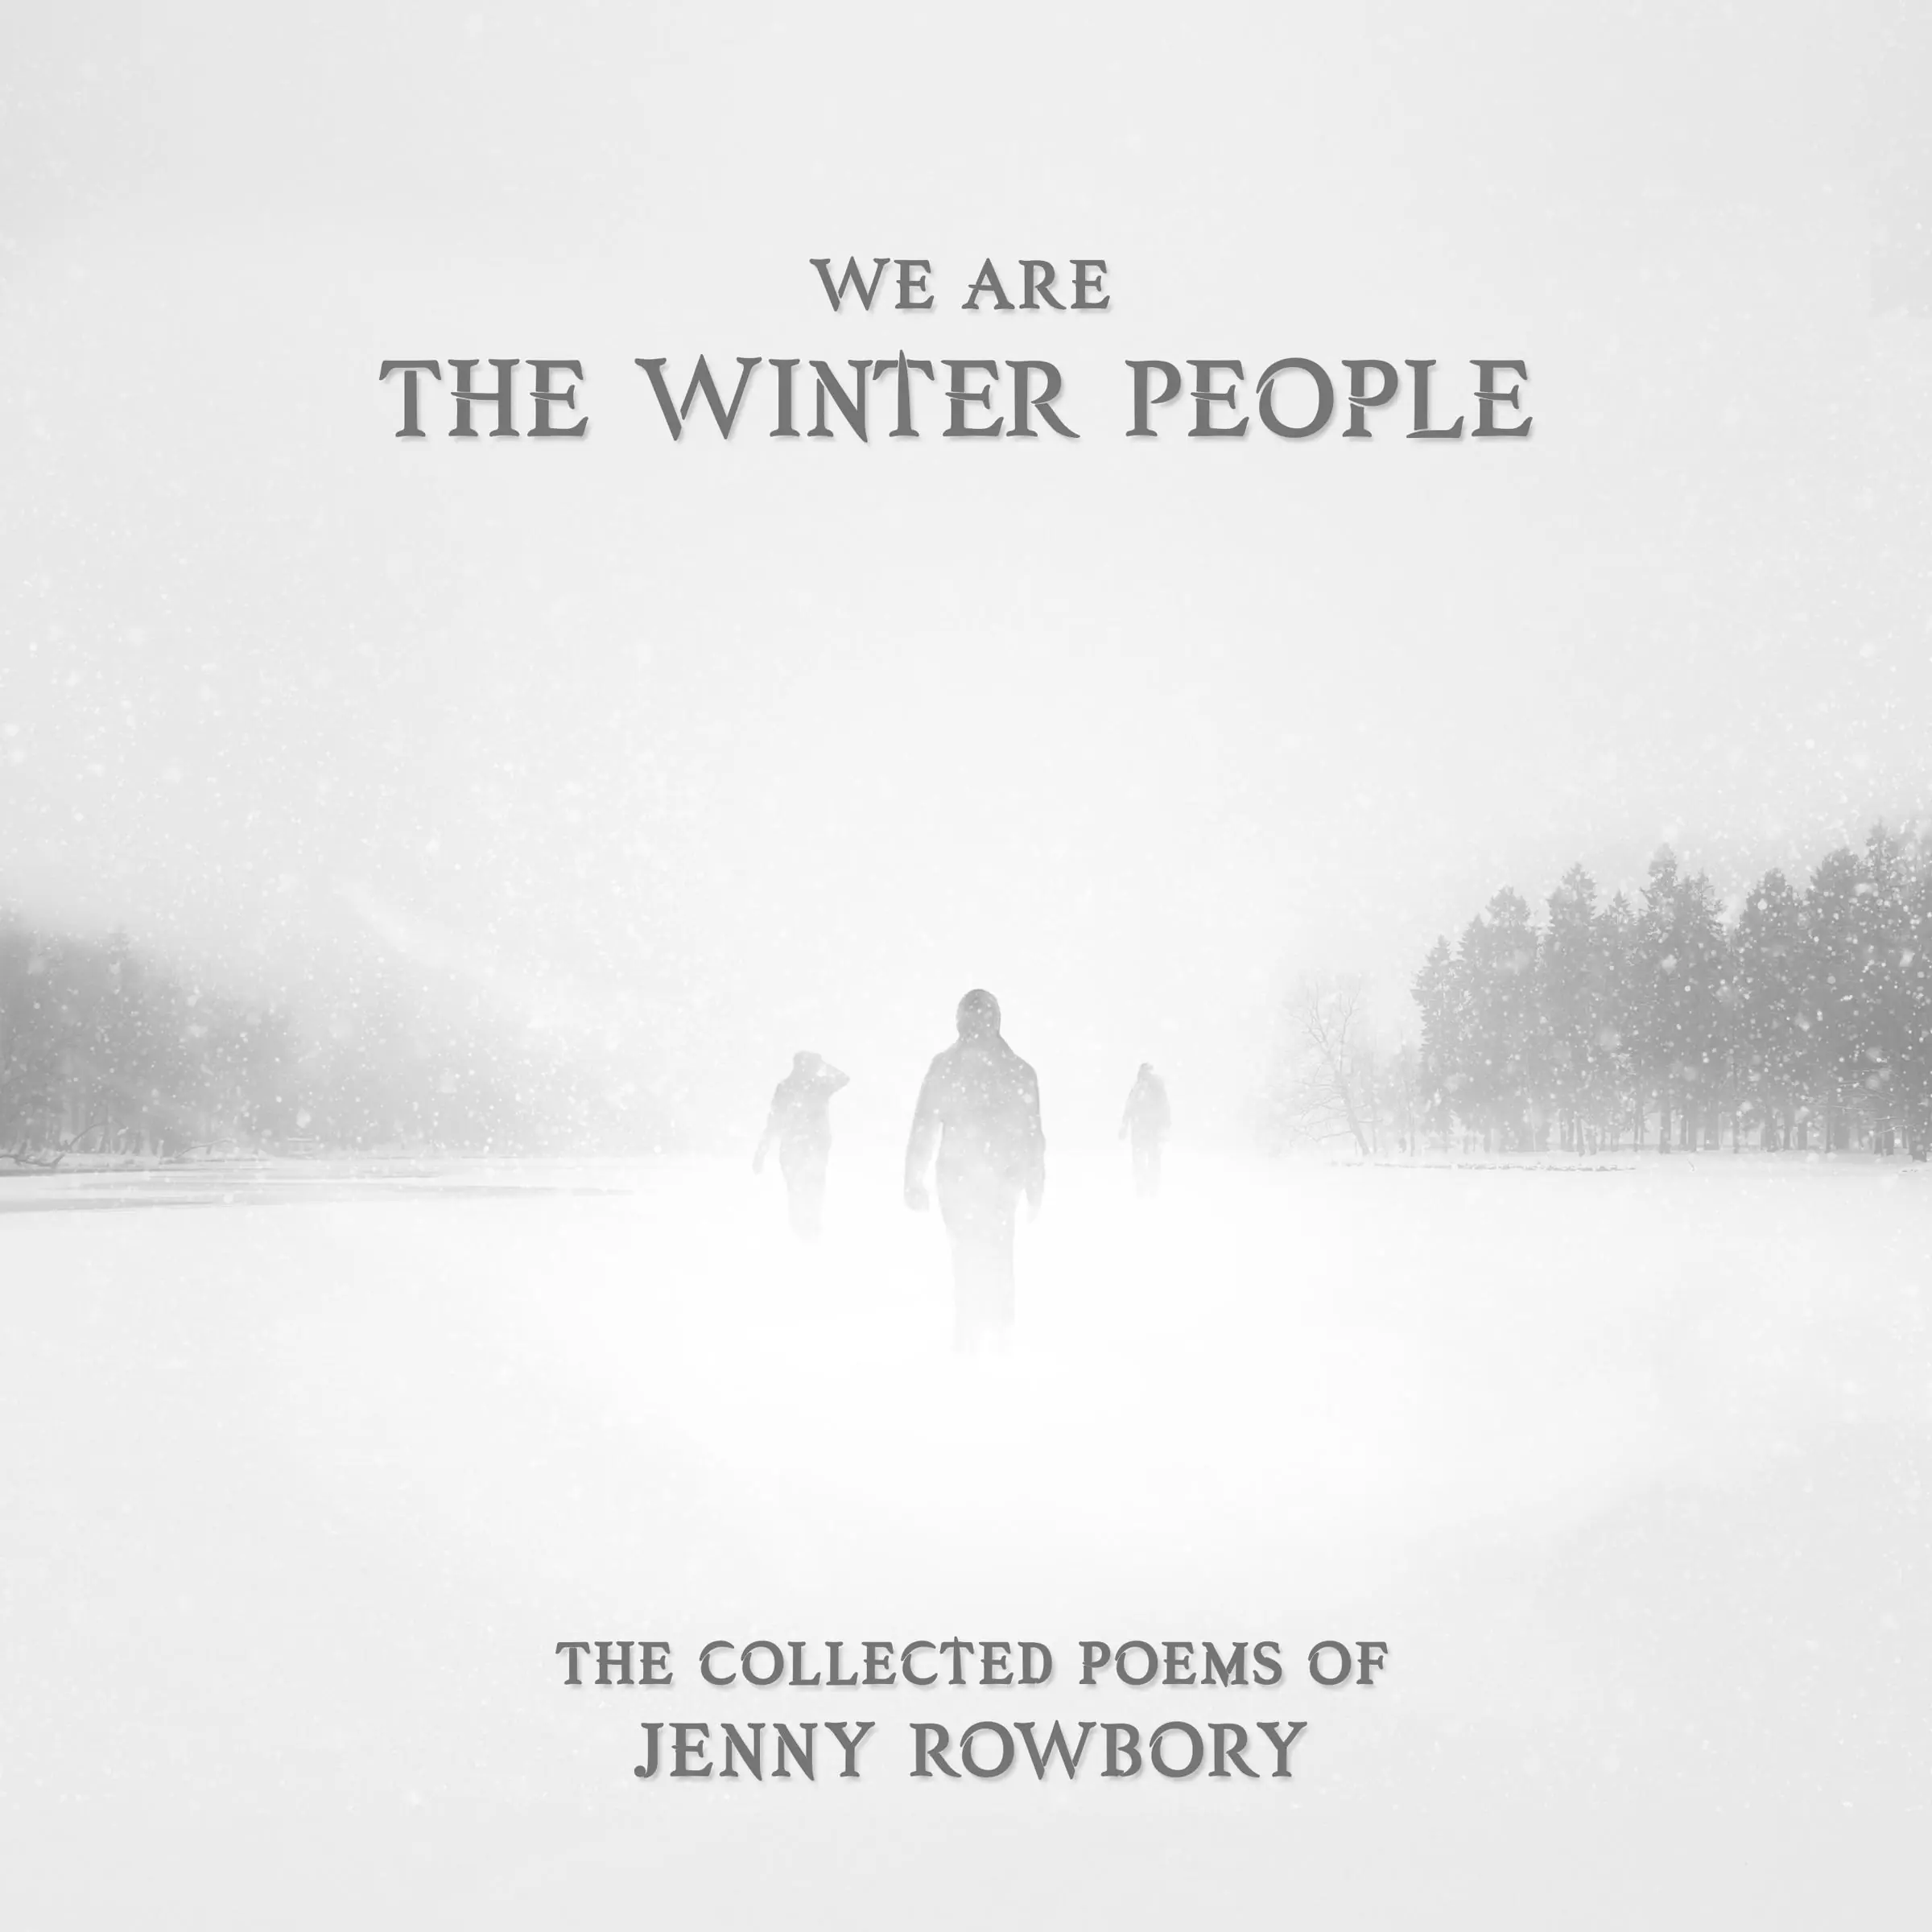 We Are The Winter People Audiobook by Jenny Rowbory